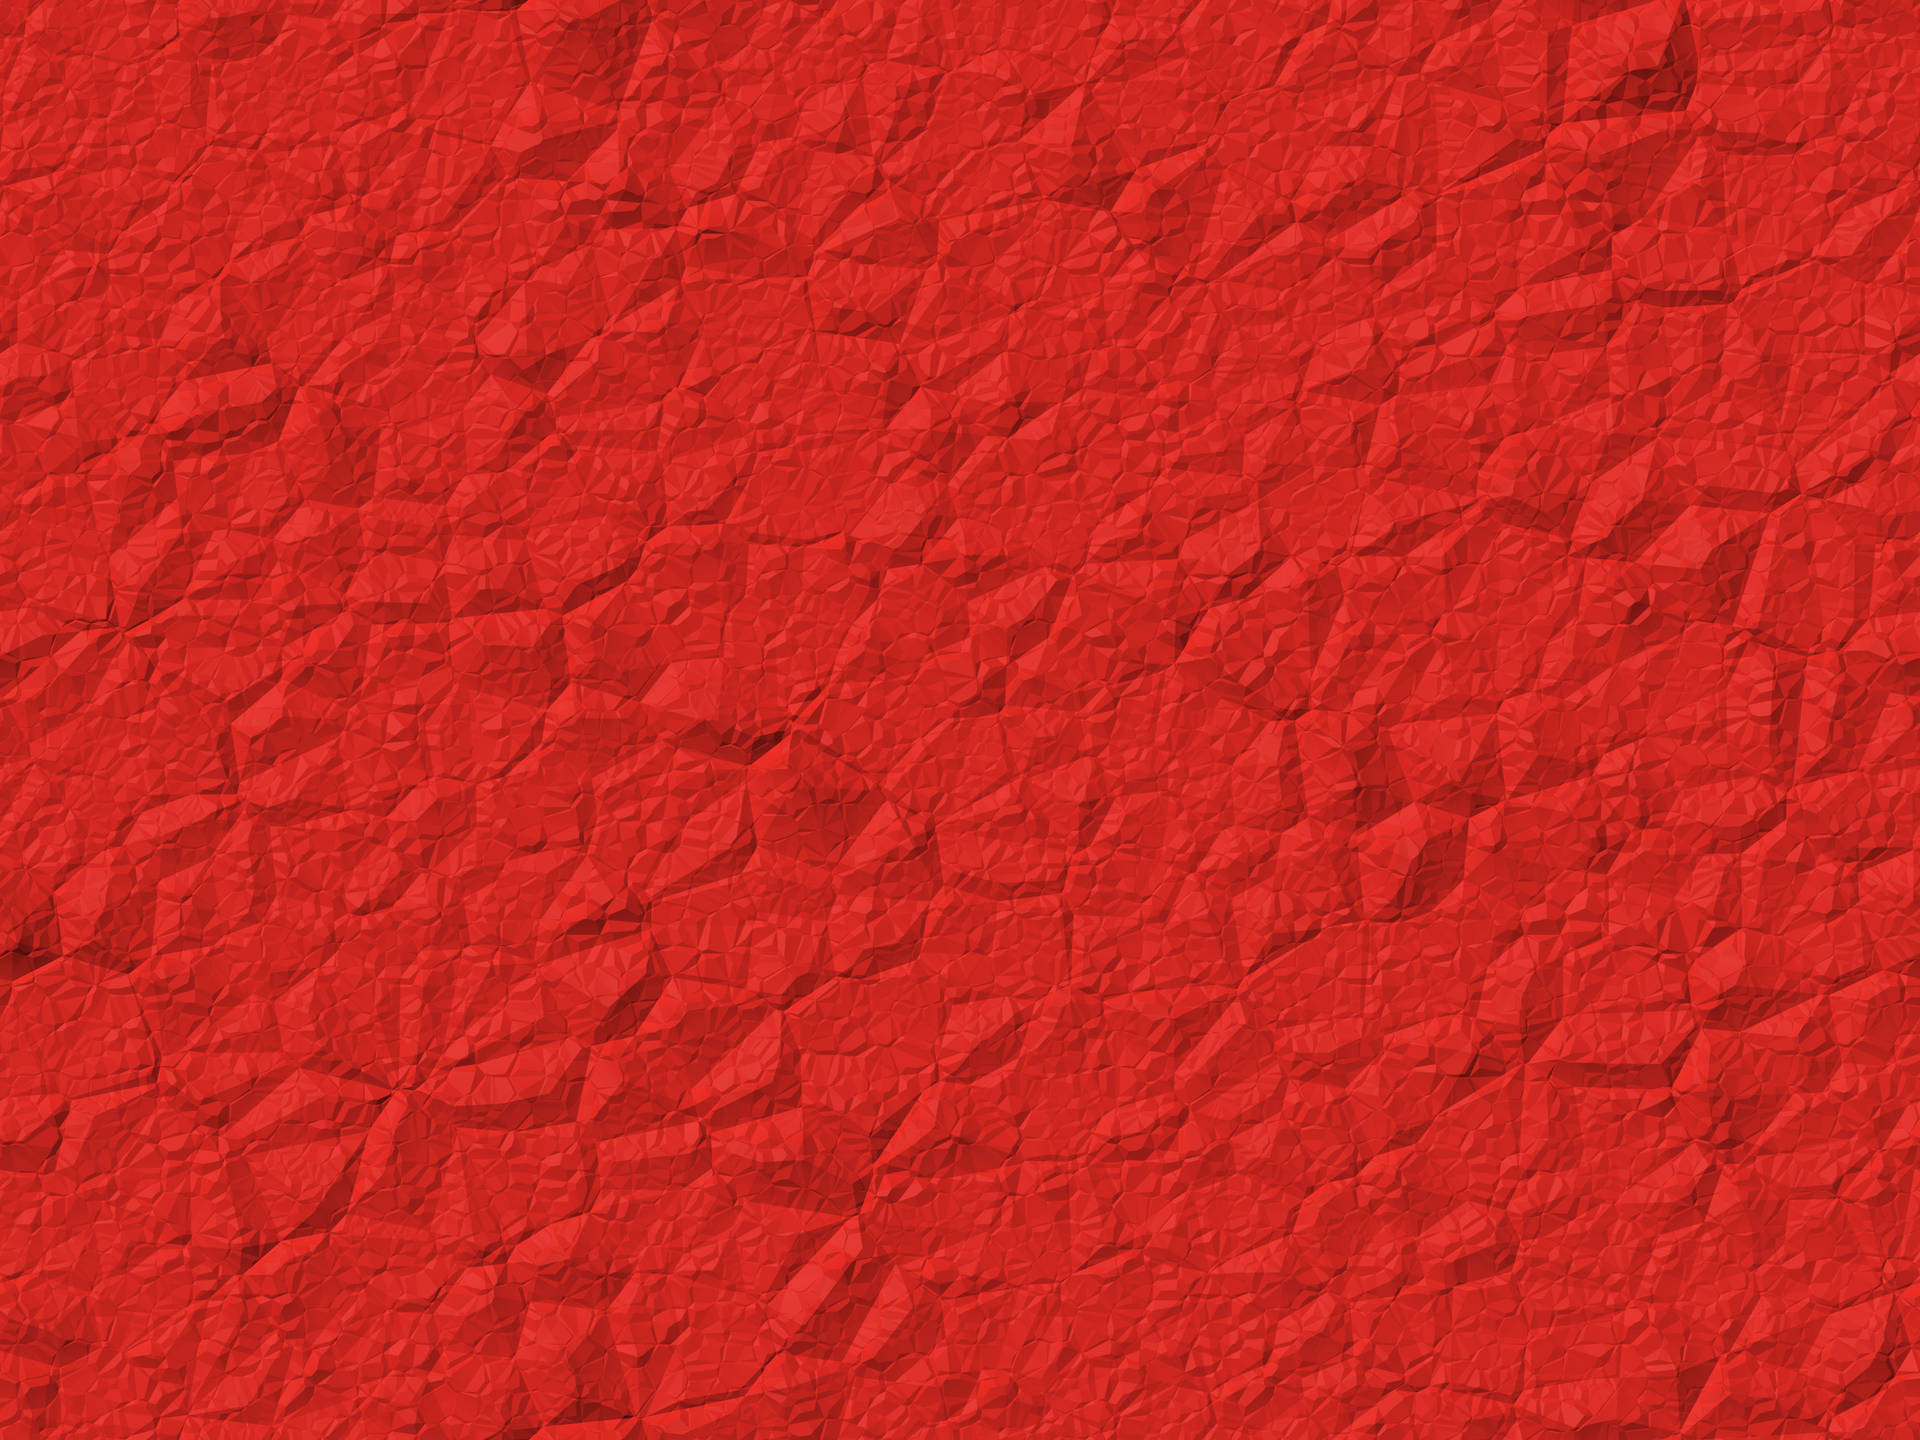 Red 4k Uhd Crumpled Paper